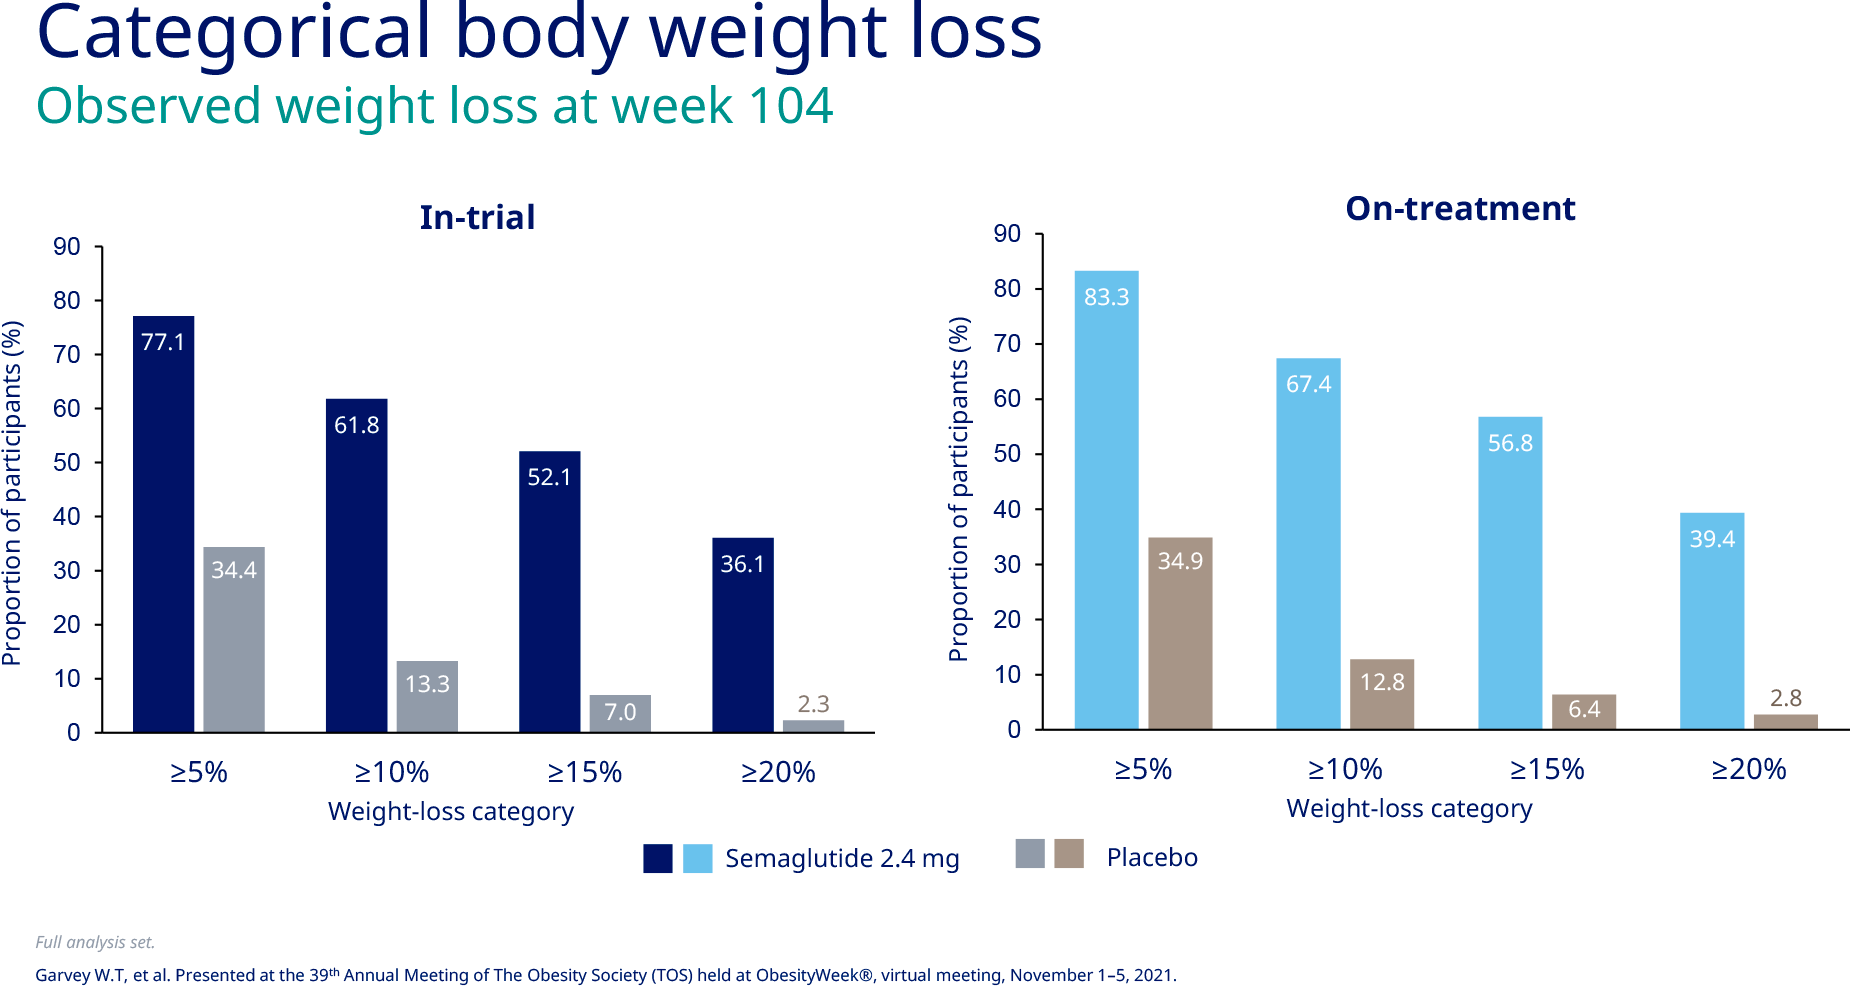 nct03693430 results 02 - Wegovy: Impressive Success of Semaglutide for Weight Loss